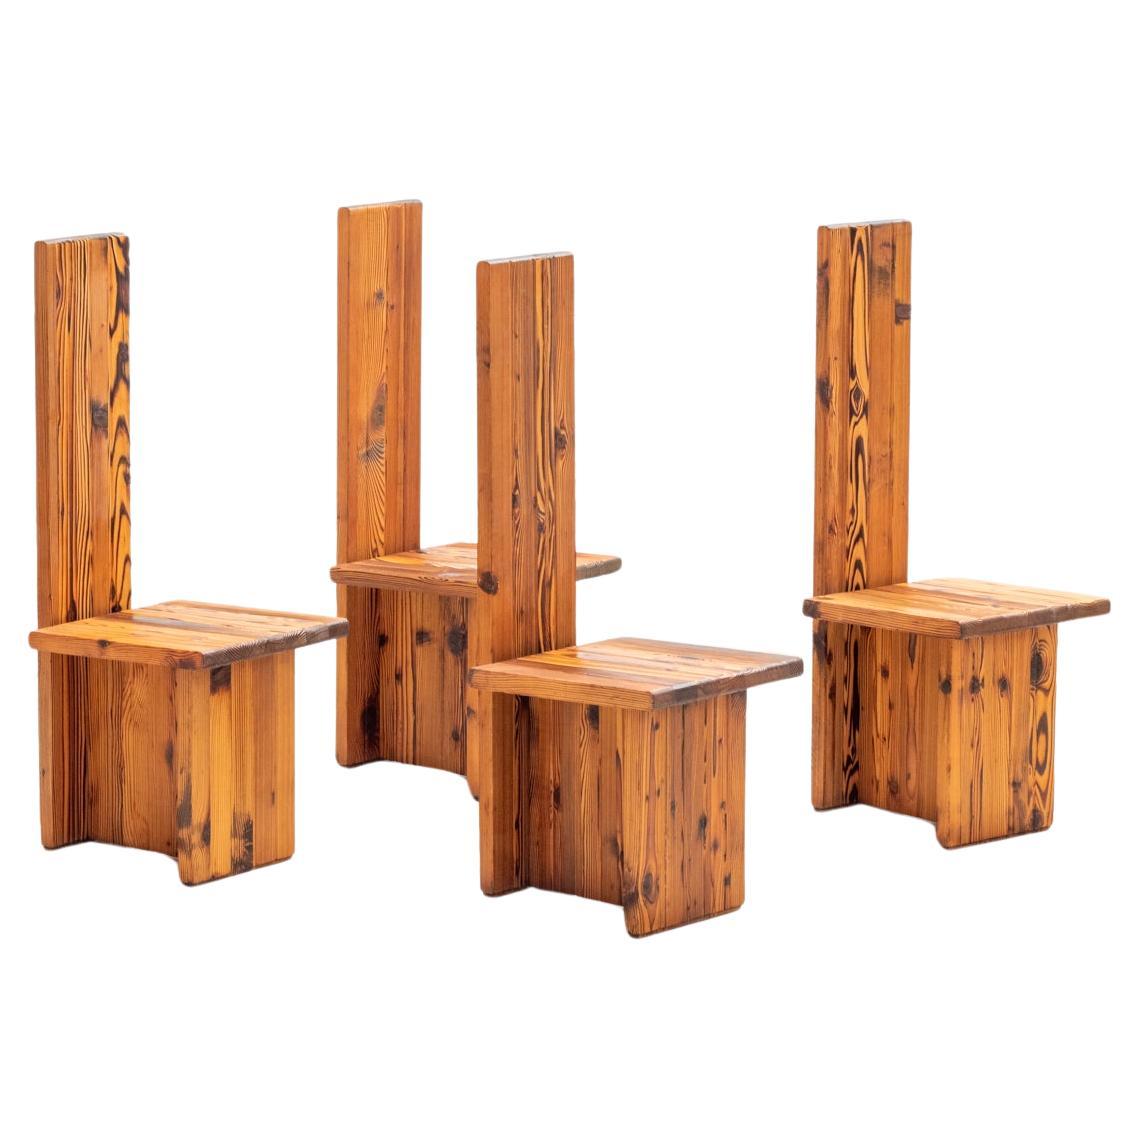 Set of 4 sculptural Italian chairs in pine